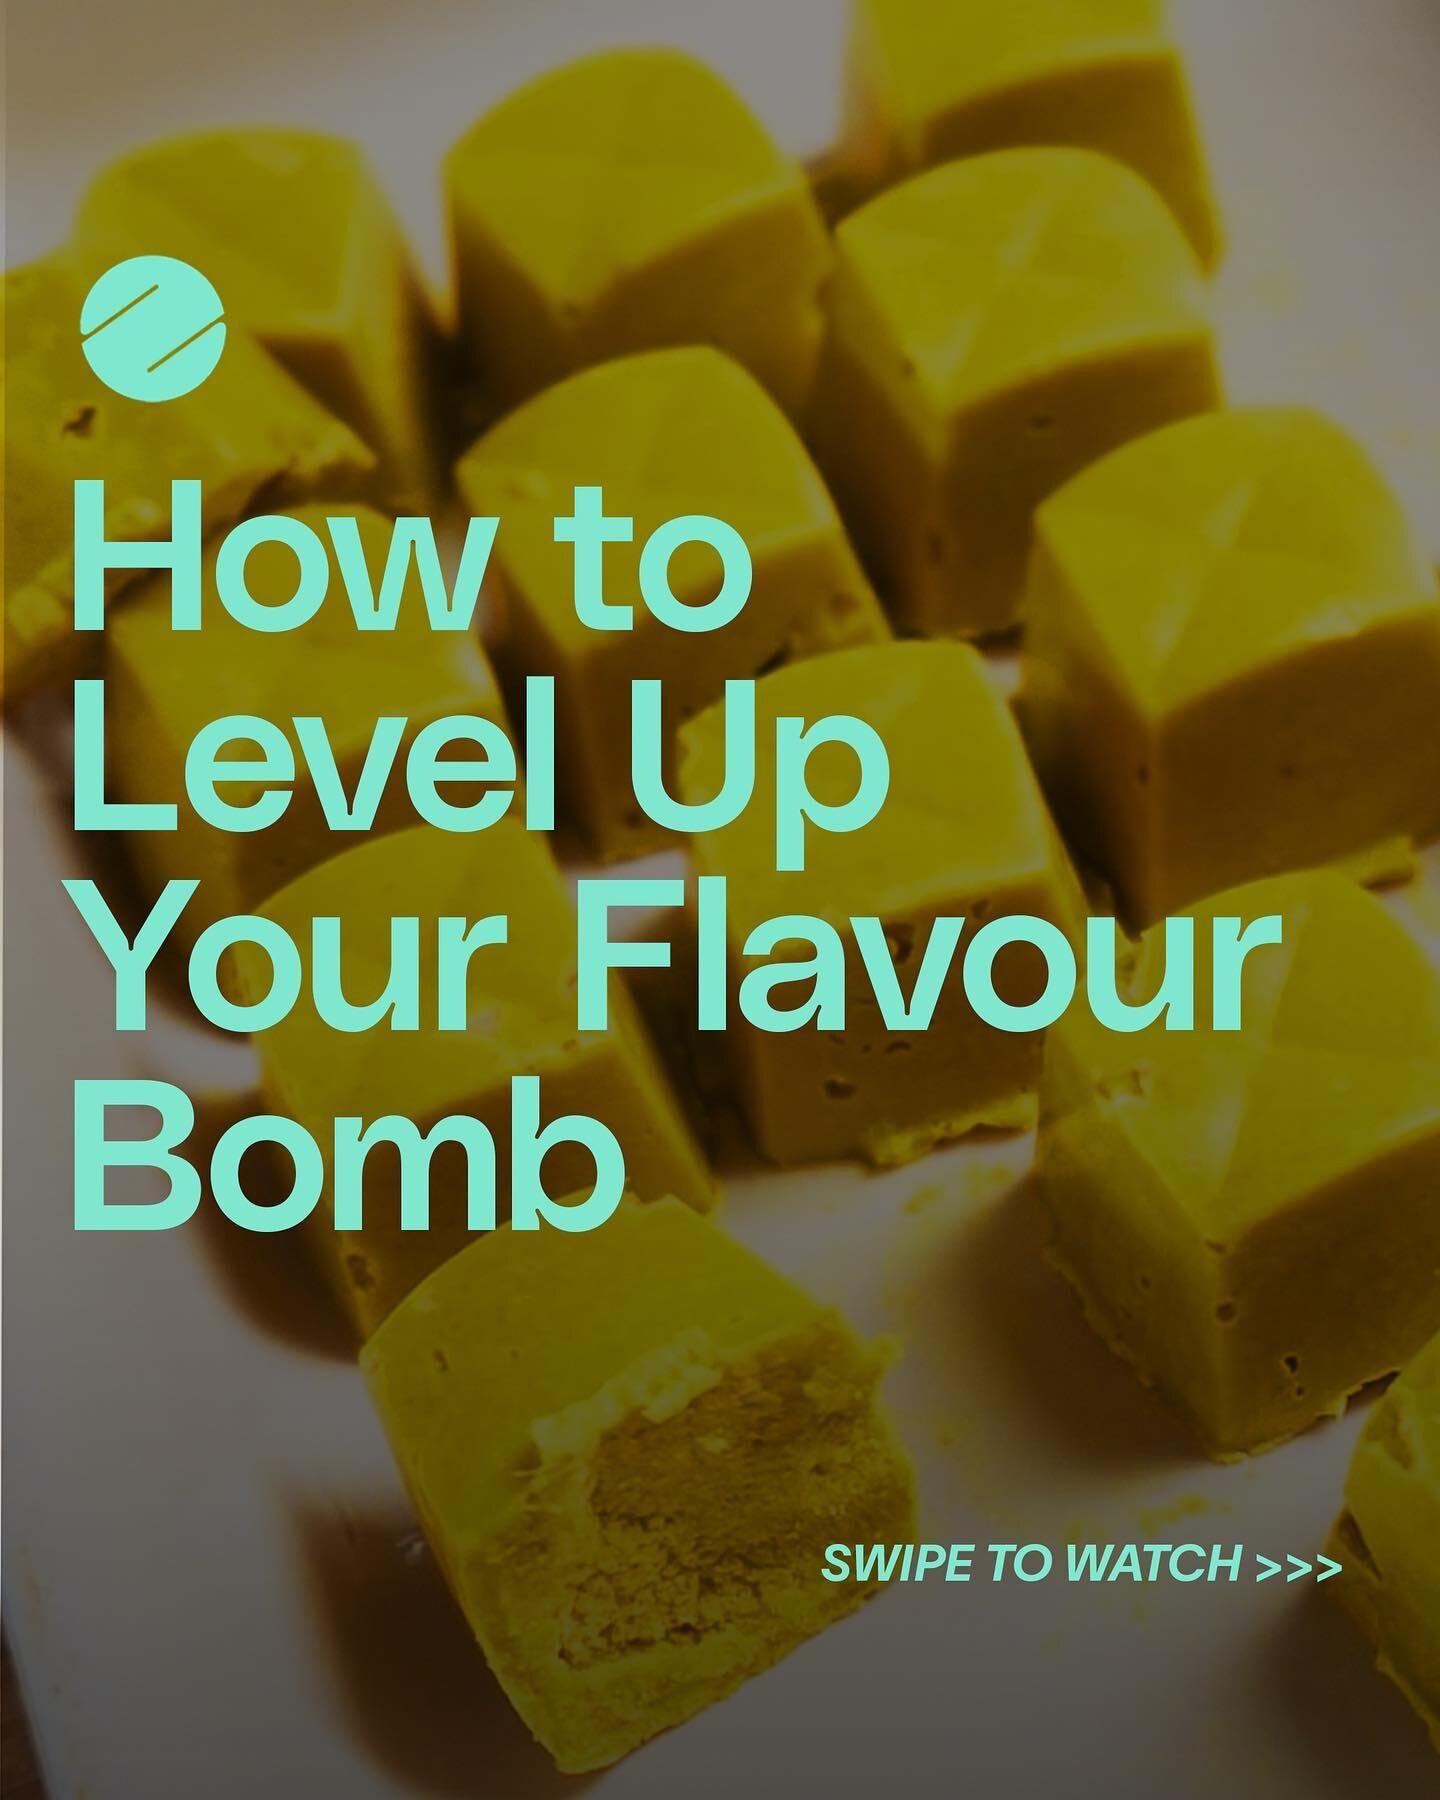 WE 💛 FLAVOUR BOMBS 

Explosive flavour on tap: top tips for making &amp; using the flavour bomb. 

This is the gateway to epic dinners in a flash. It&rsquo;s a simple blend (or crush) of 3 spicy roots: Fresh Ginger, fresh Turmeric &amp; garlic. You 